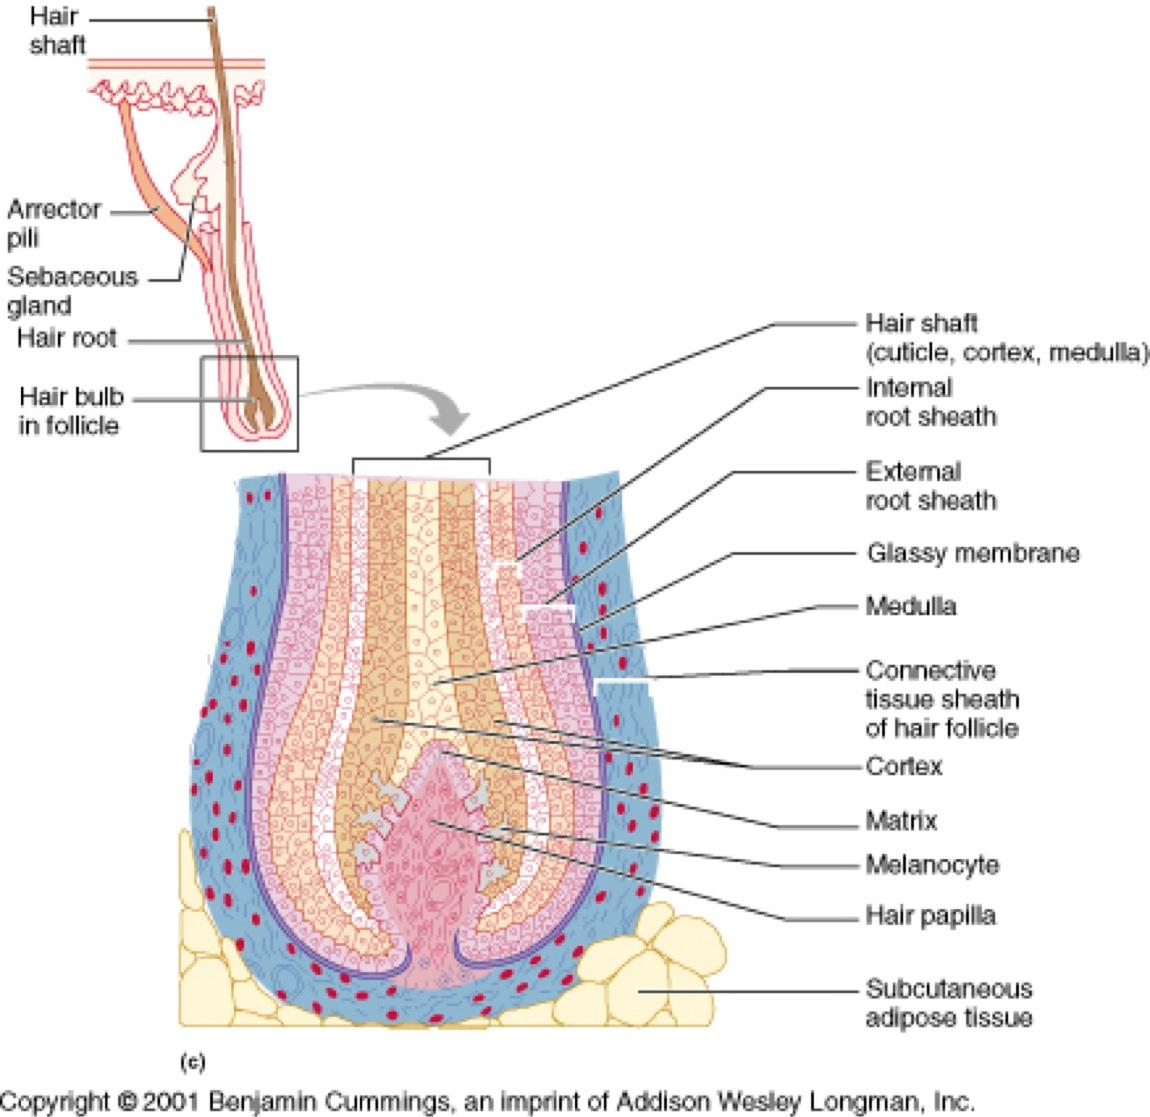 outer fibrous sheath is dermal connective tissue. hair is produced by hair ...